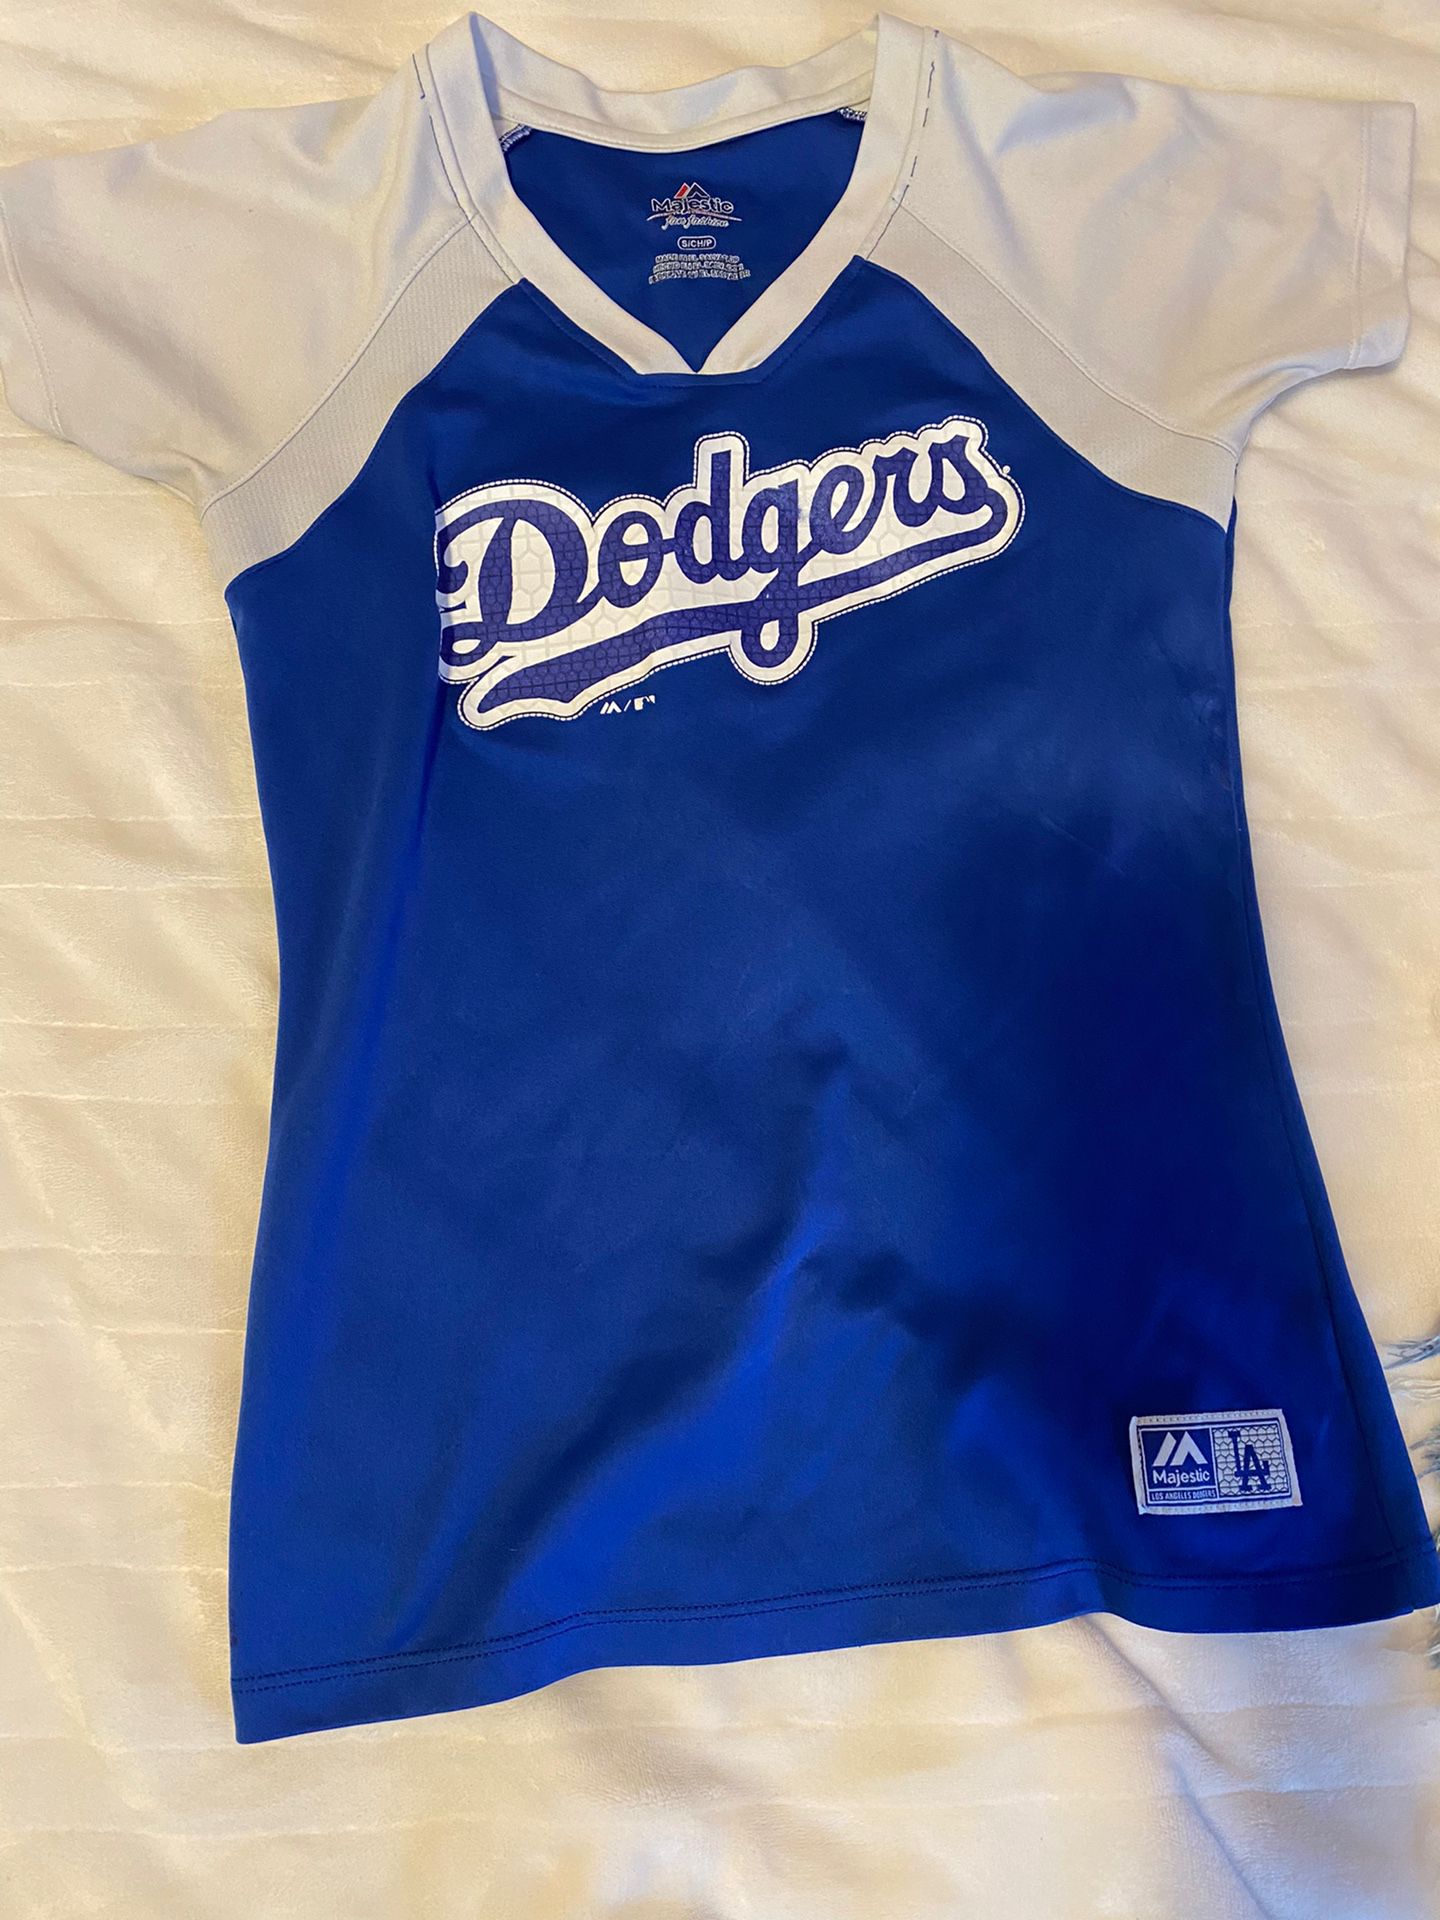 Dodgers Button Up Jersey for Sale in Bakersfield, CA - OfferUp